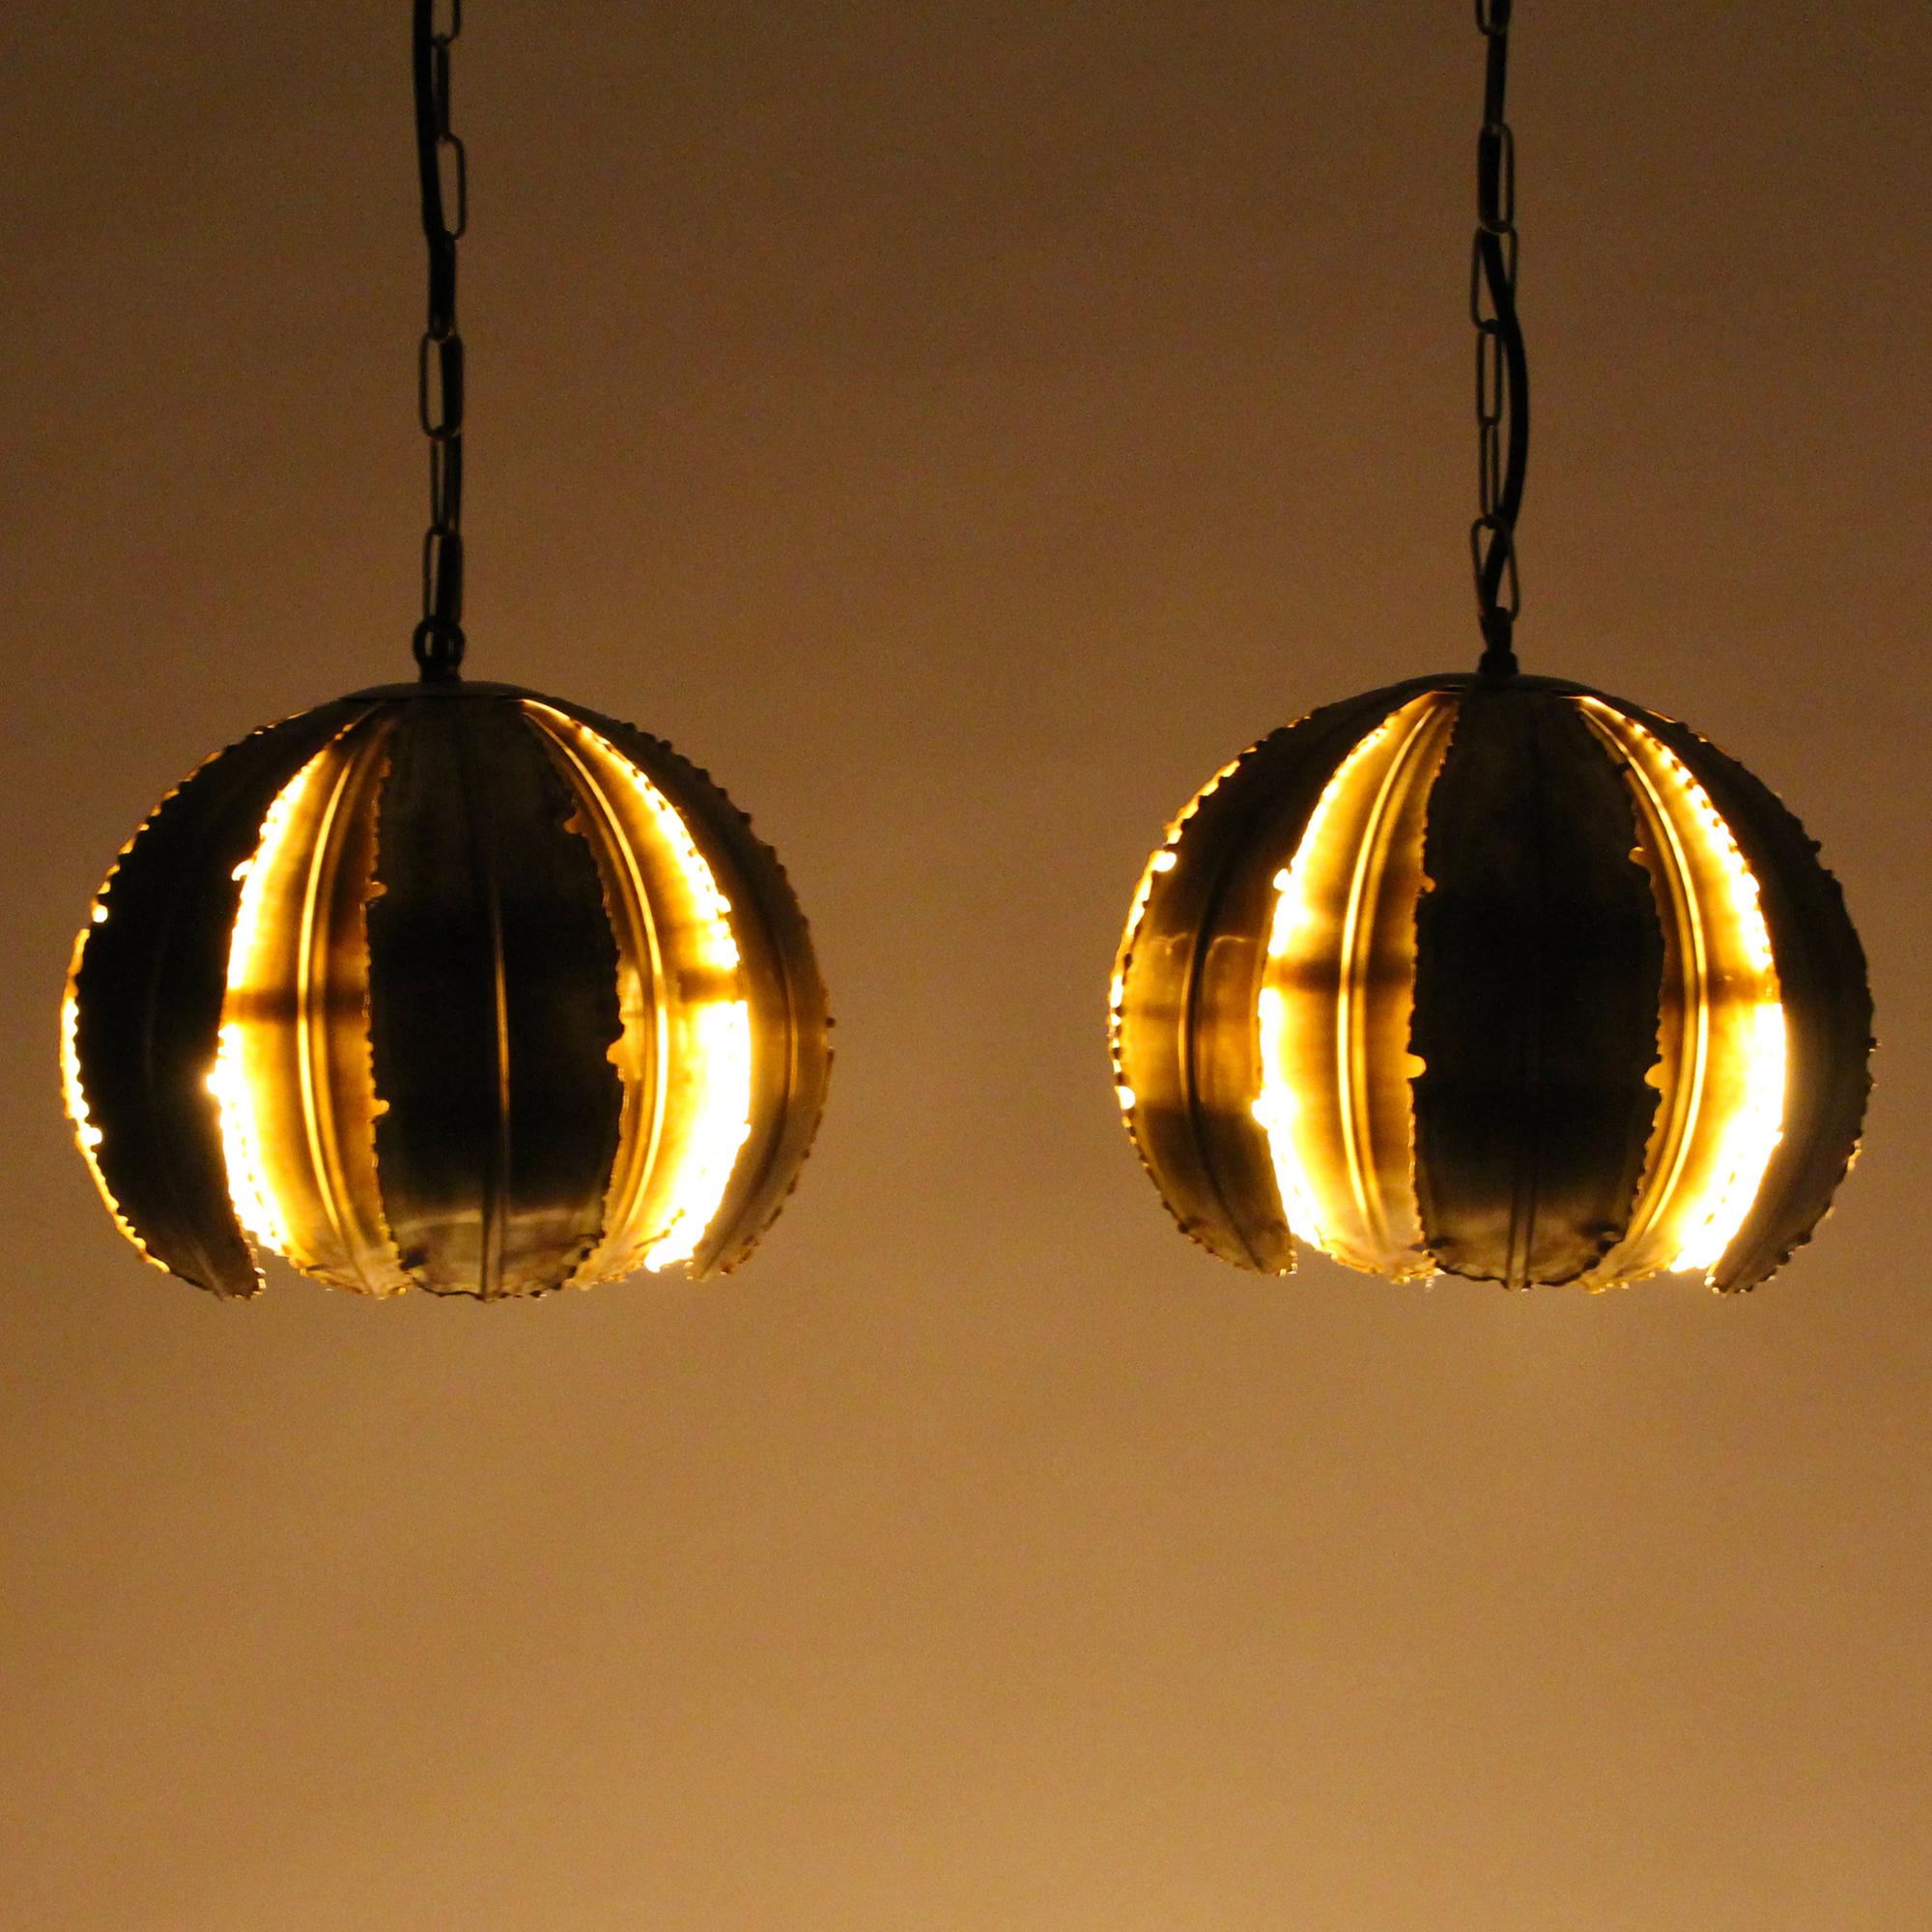 Type 6404, pair of round brass lamps from the 1960s by Svend Aage Holm Sorensen - both in excellent vintage condition!

A round Brutalist styled hanging lamp, made up of 12 leaf shaped brass plates with serrated edges - acid treated in Holm